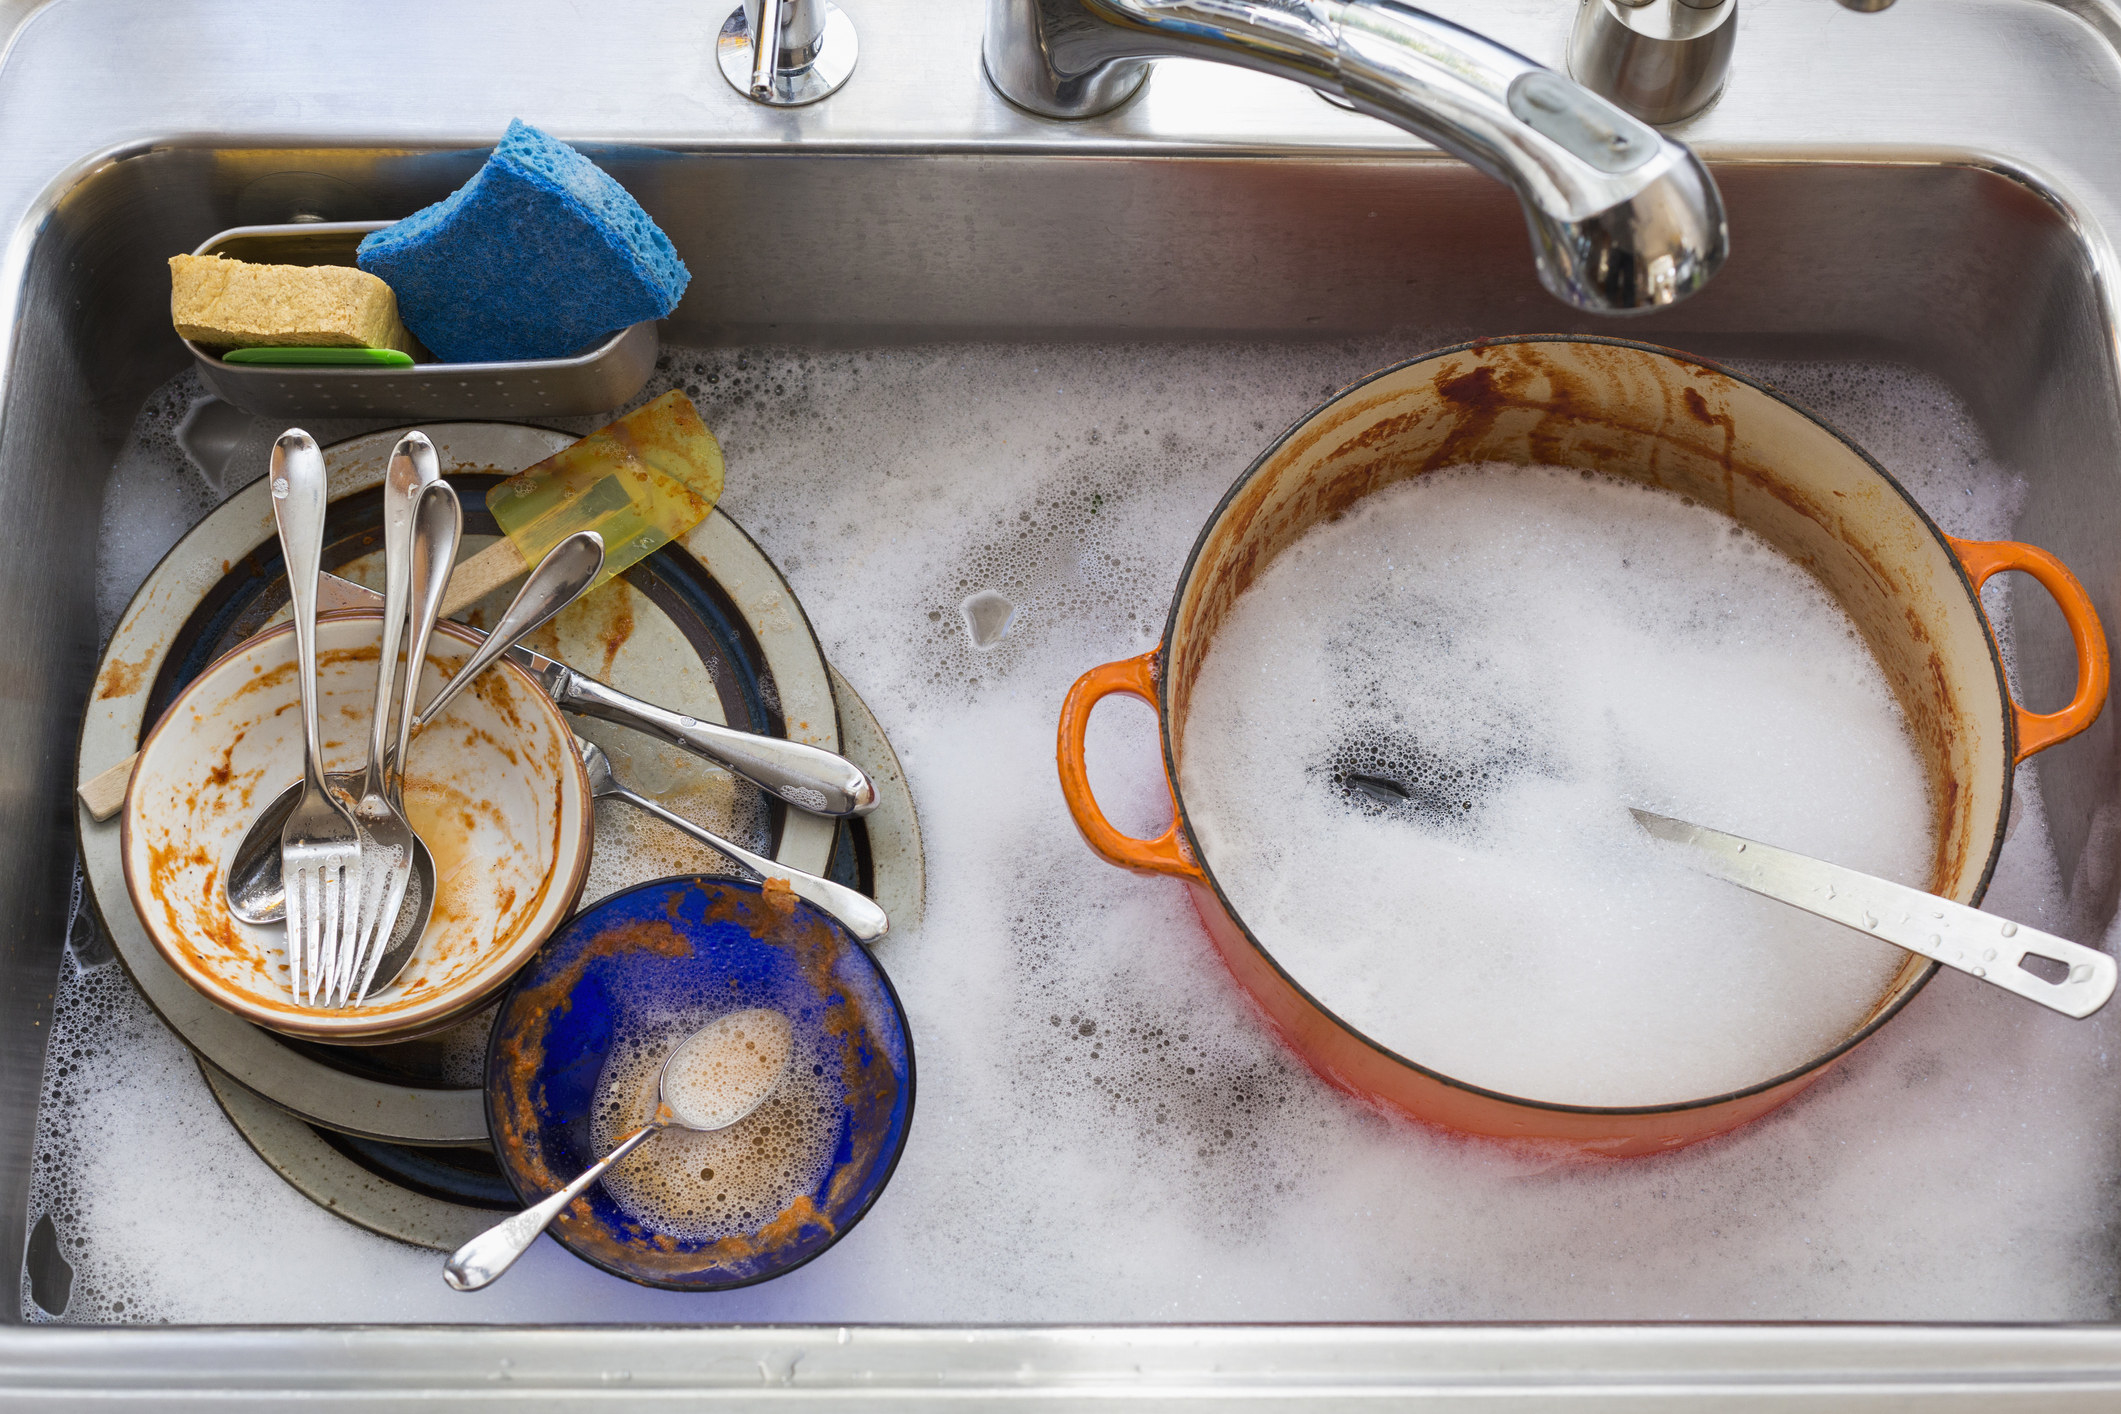 Kitchen sink full of dirty dishes.